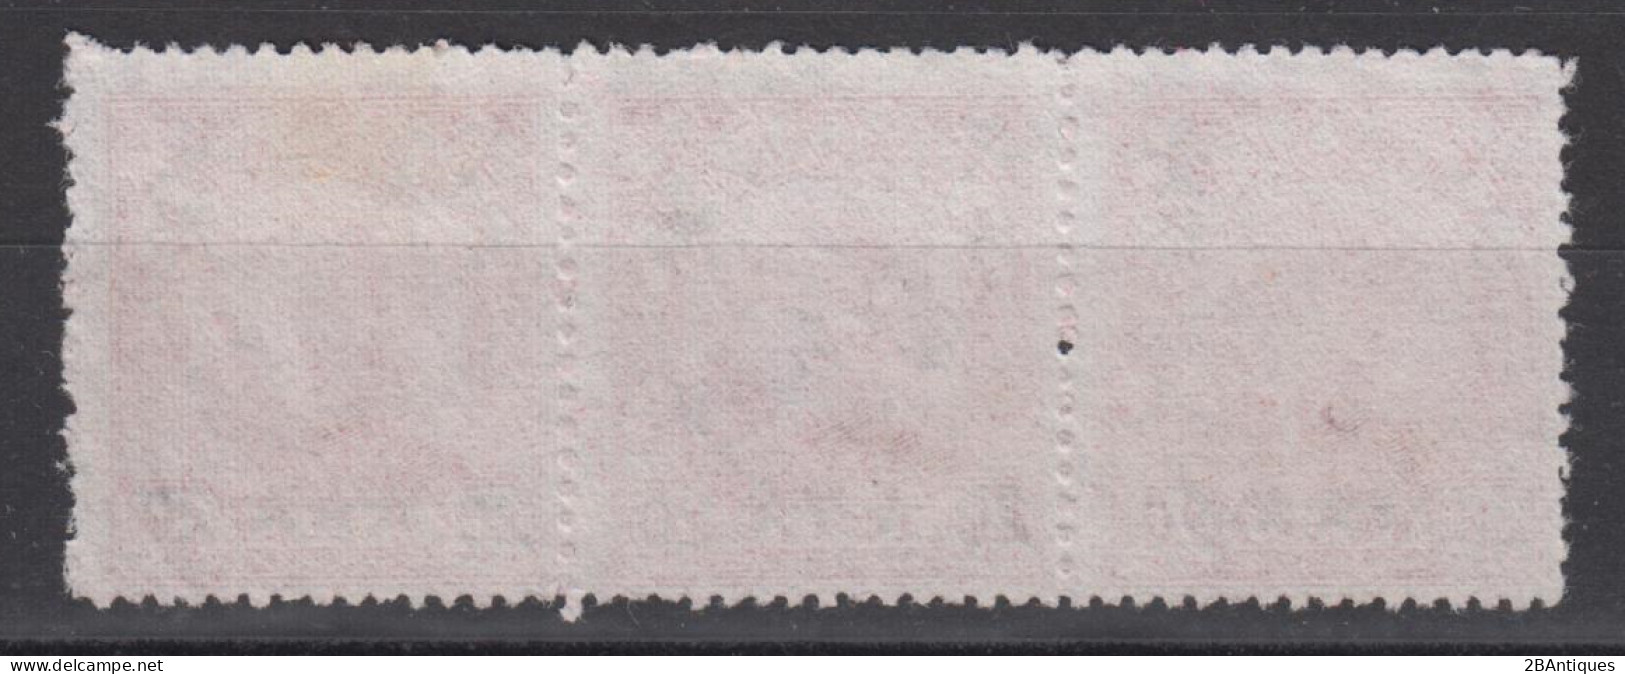 TAIWAN 1949-1950 - North East China Postage Stamps Surcharged STRIP OF 3 - Usati